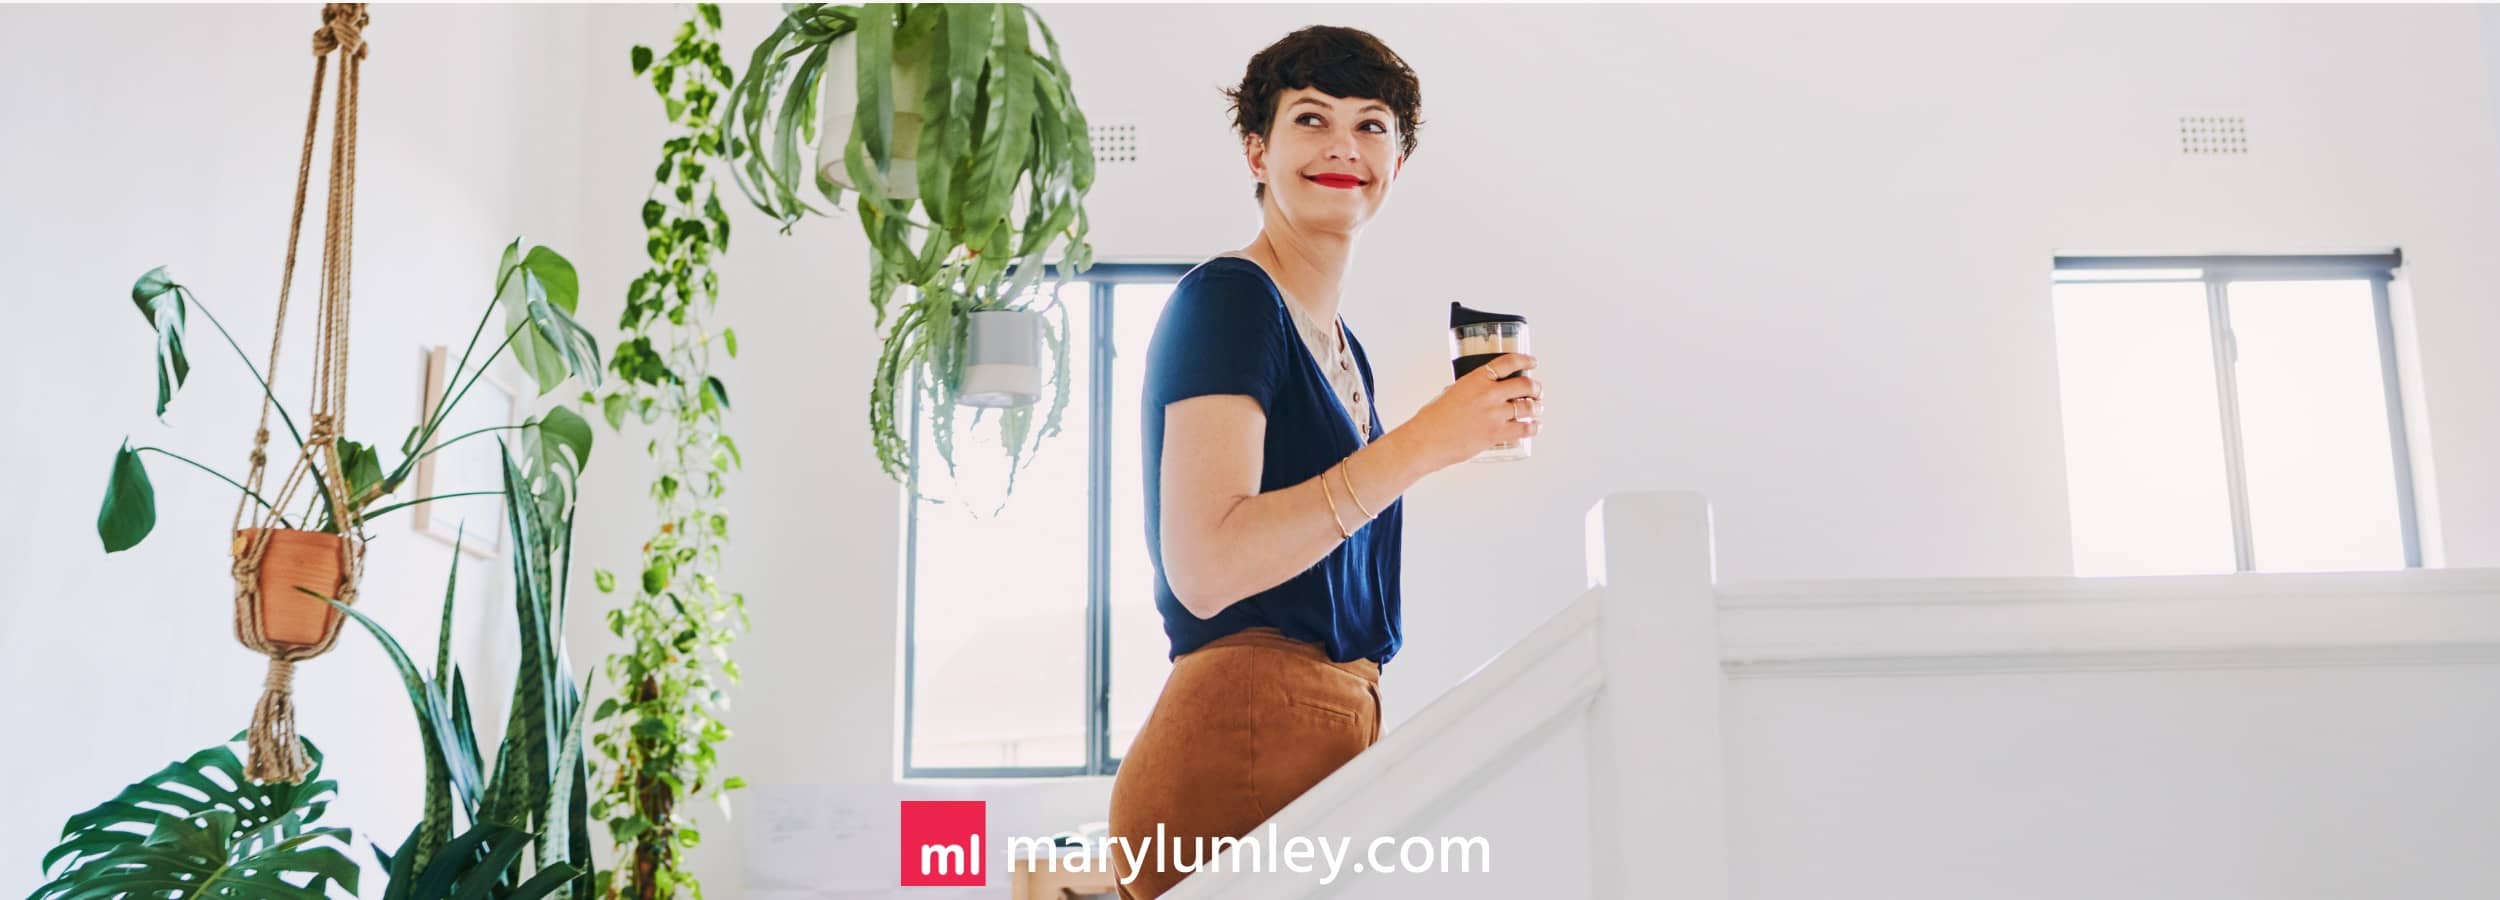 Monthly views on Pinterest – are they important? Some accounts have millions of monthly viewers. It looks impressive, but it's actually not that important. Find out which key Pinterest metrics to focus on instead! | Mary Lumley – Conversion Focused Pinterest Marketing